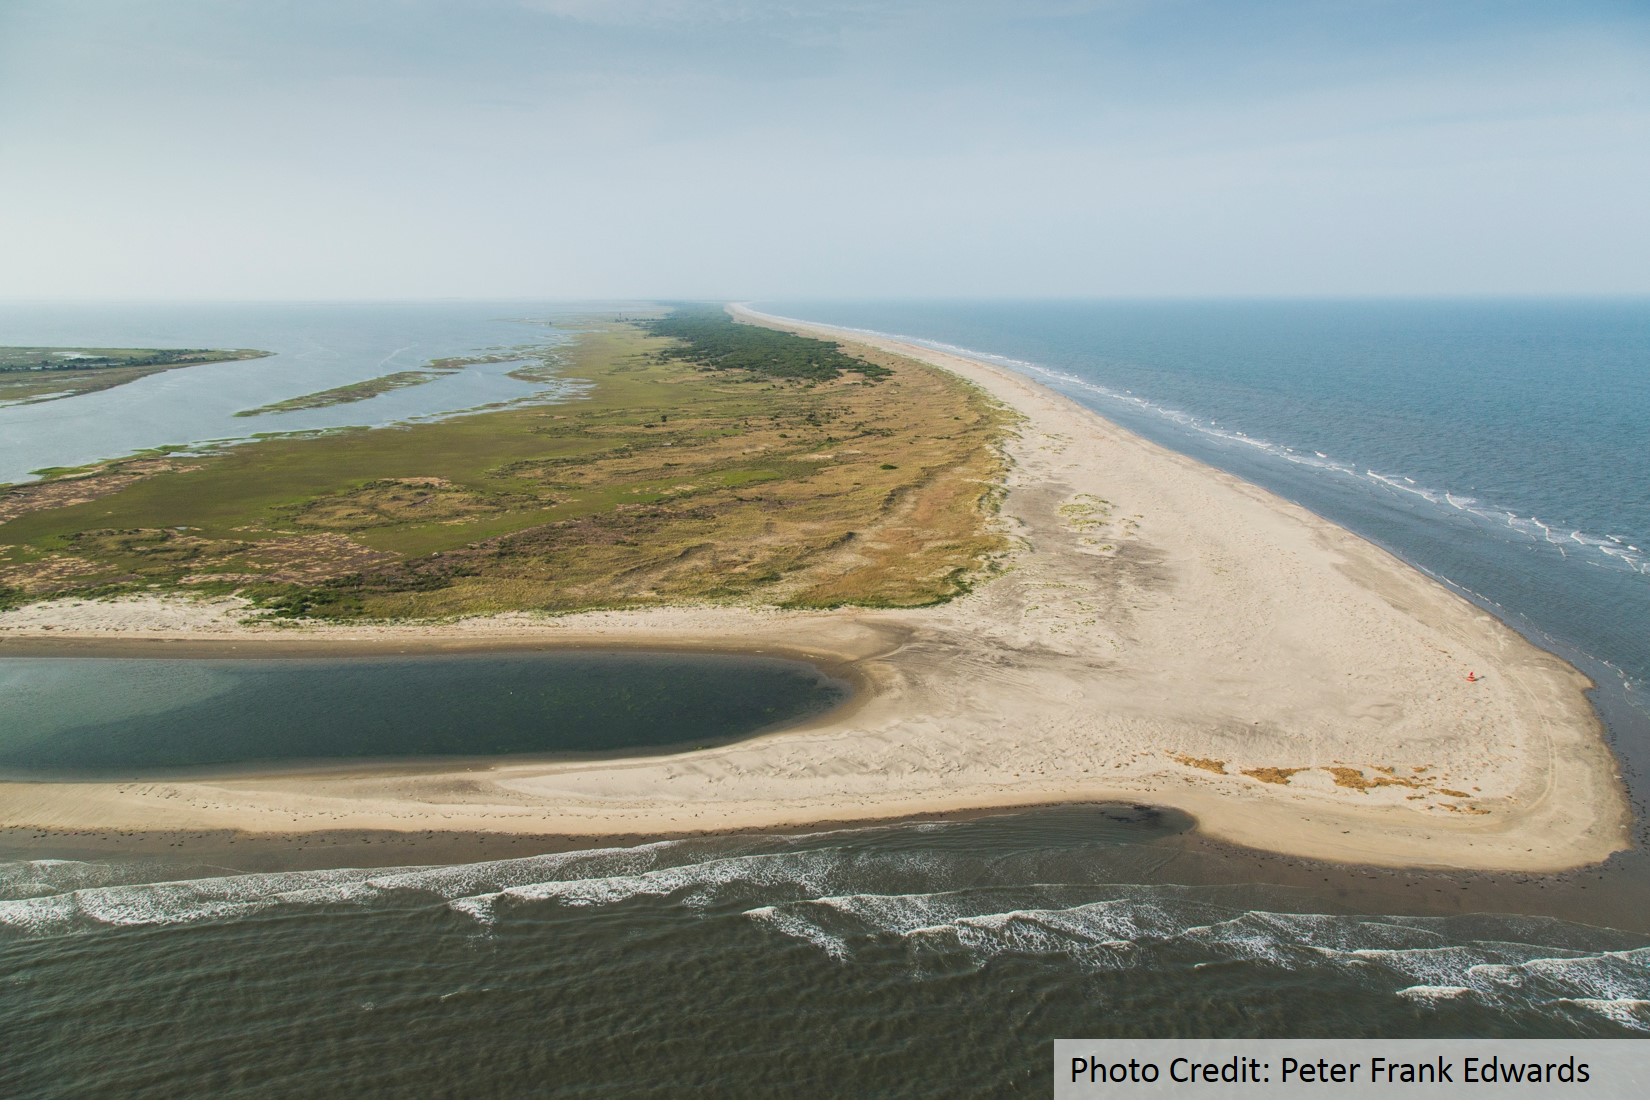 Eastern Shore communities confront changes brought on by sea level rise and stronger storms